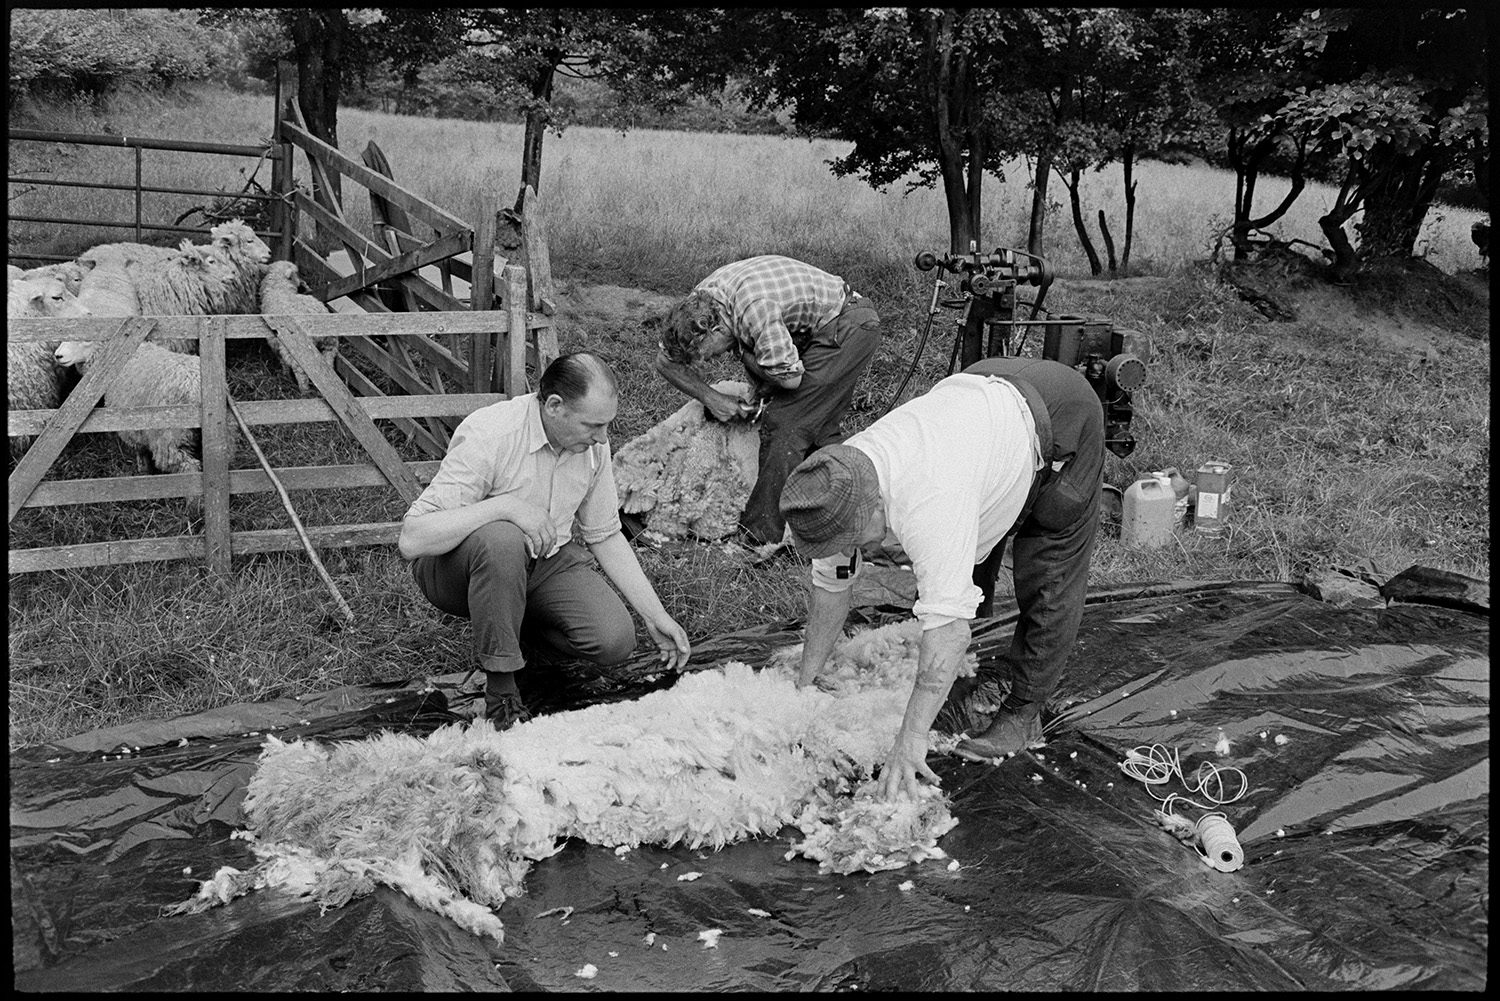 Shearing sheep, tying up fleeces. 
[A man shearing a sheep in a field at Addisford, Dolton. Archie Parkhouse, who is smoking a pipe, and another man are folding up sheep fleeces in the foreground. Sheep in a pen can be seen behind them.]